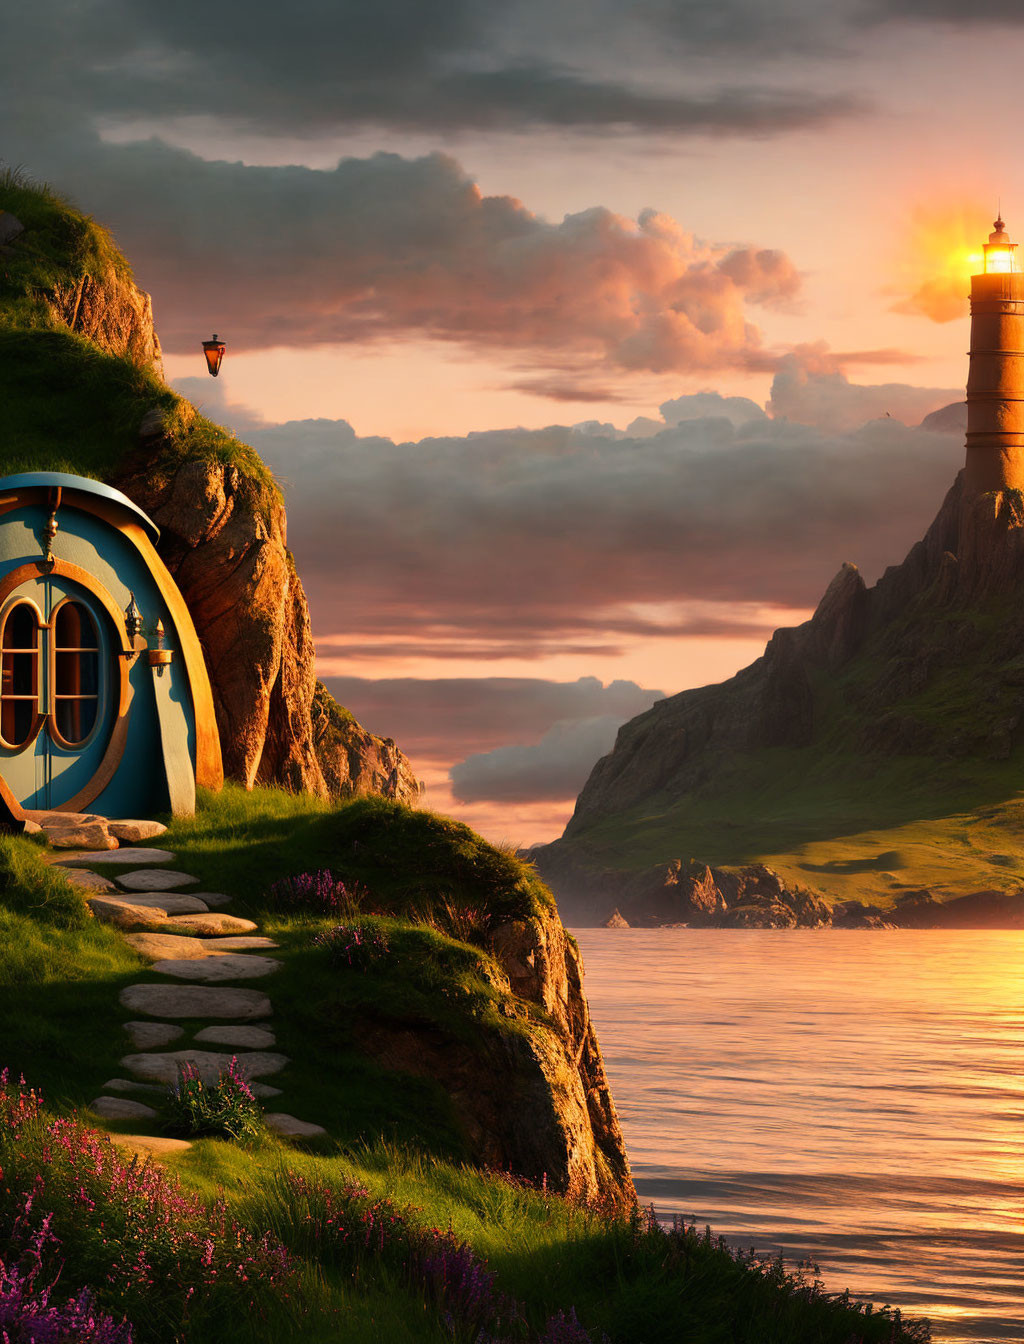 Seaside landscape with round hobbit-style door and lighthouse at sunset